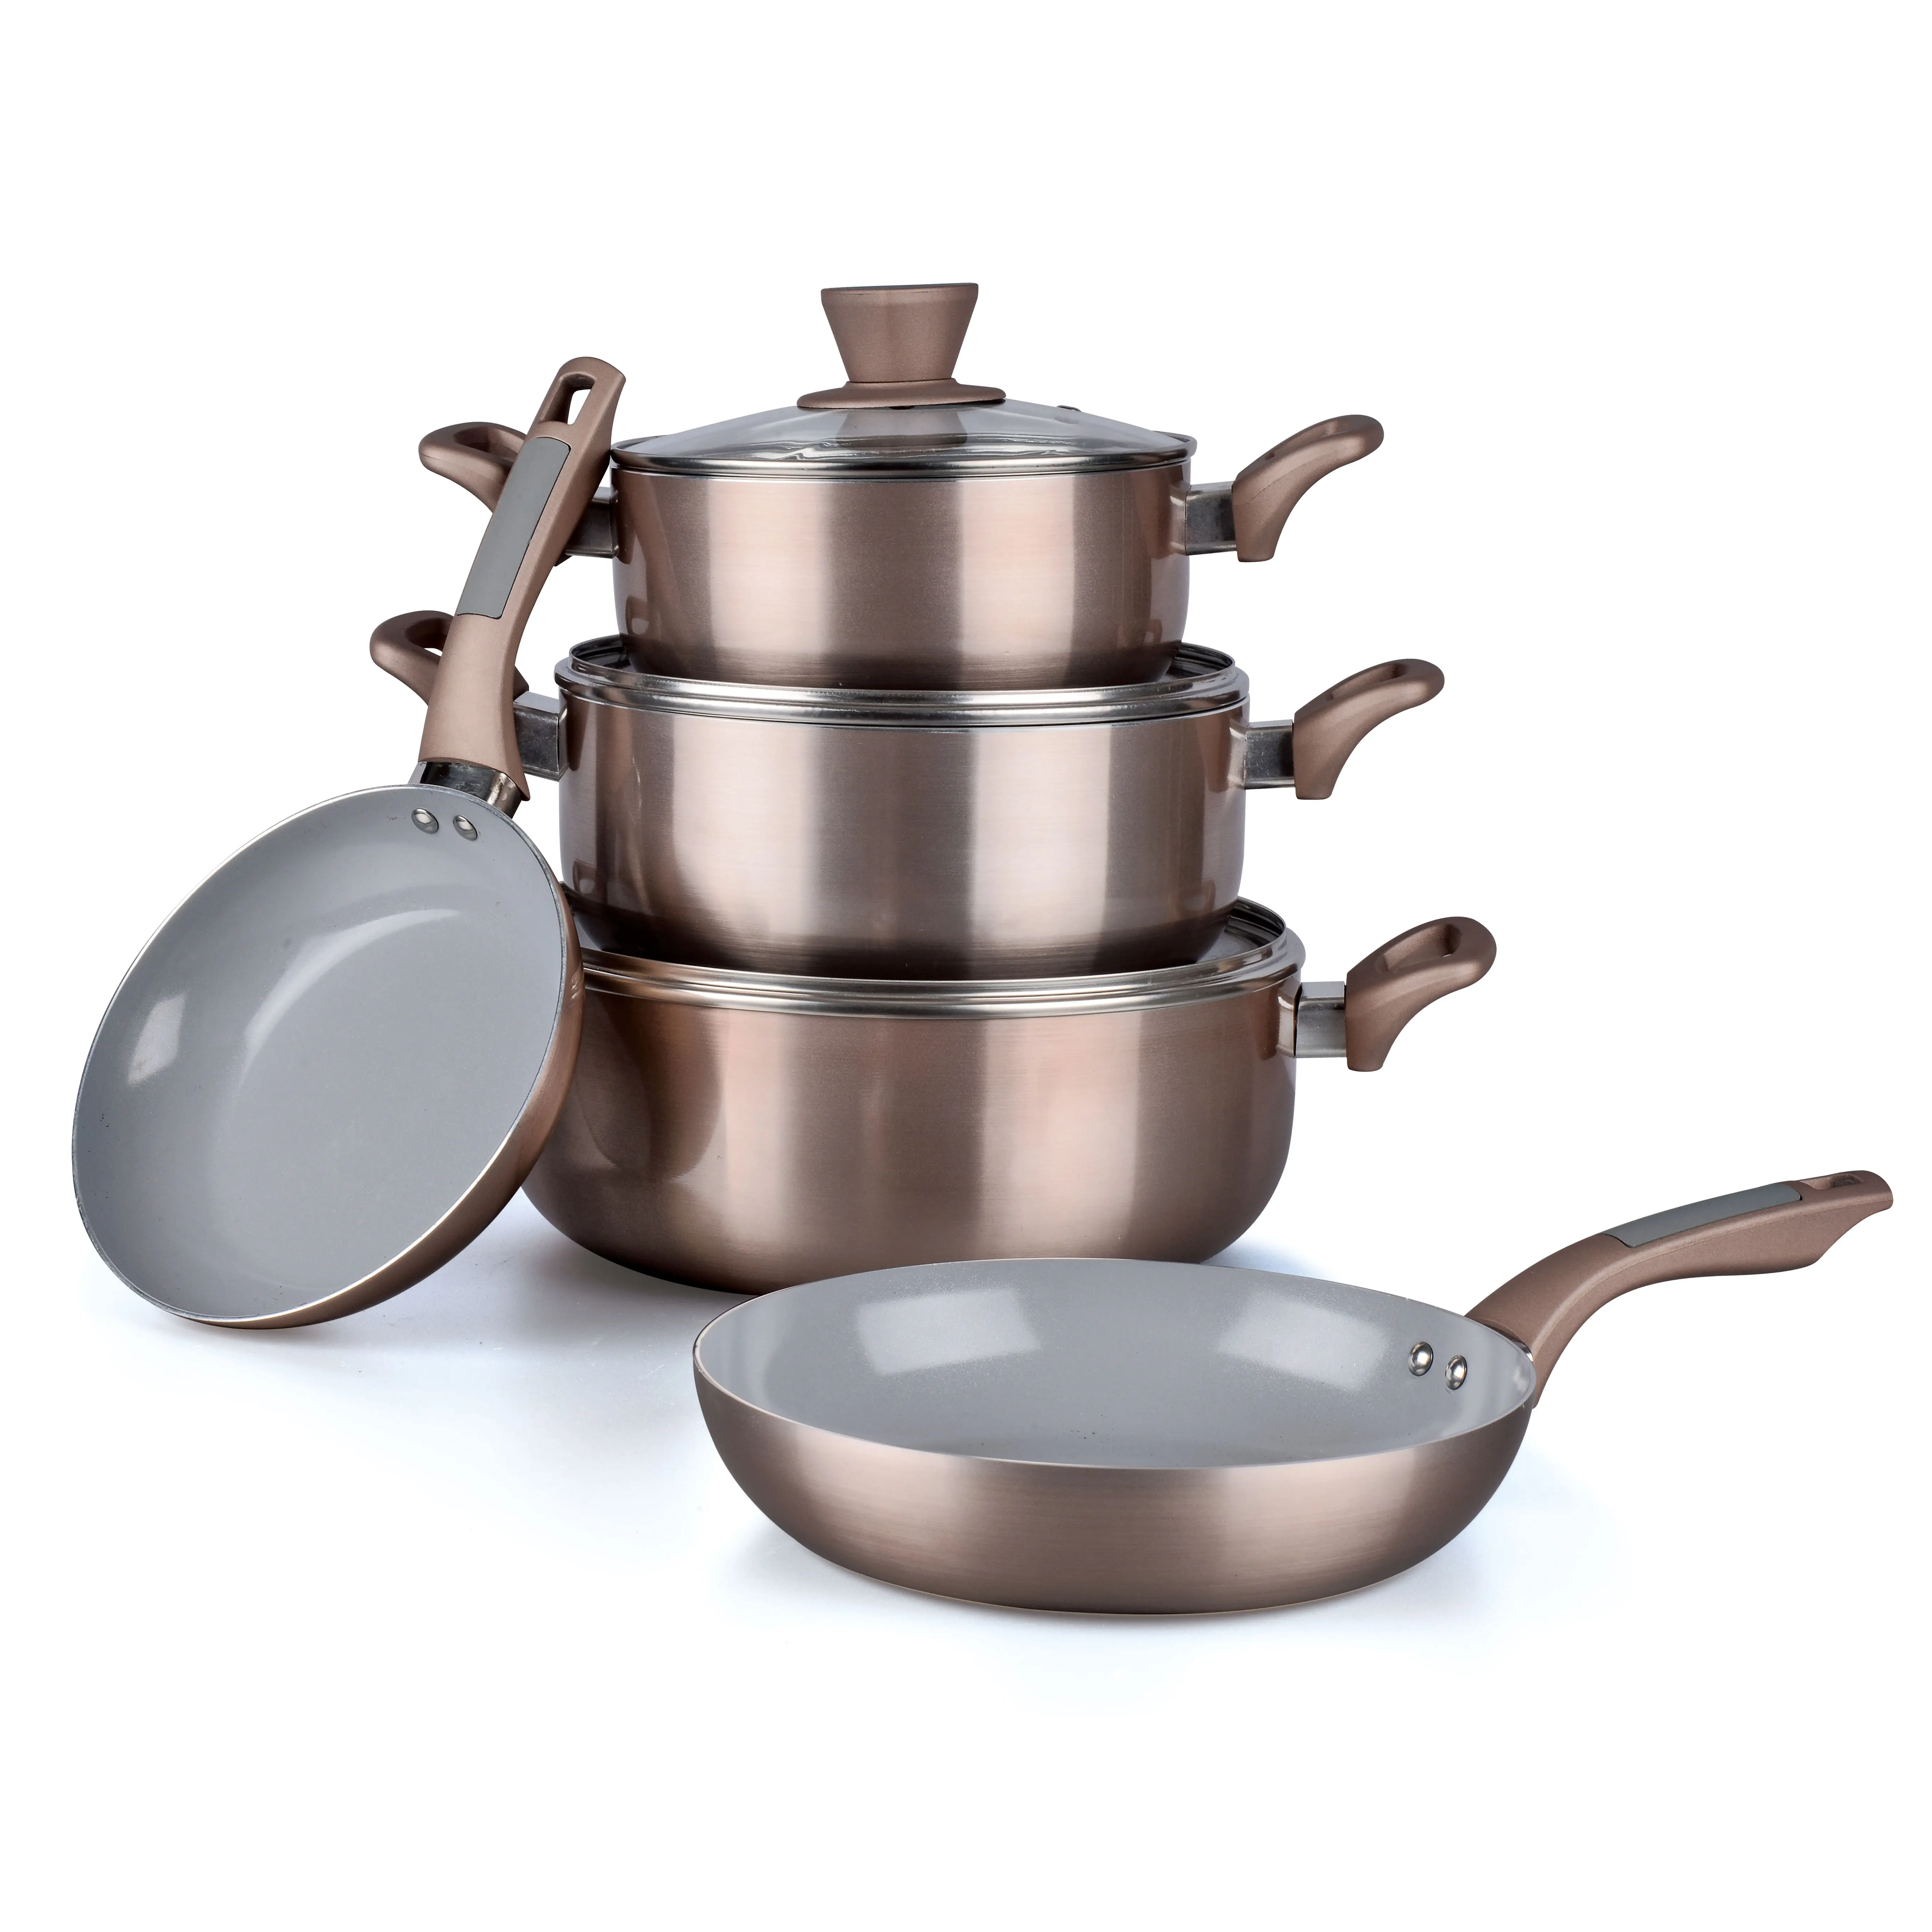 Economic And Reliable Nonstick Cookware 10pcs High Quality